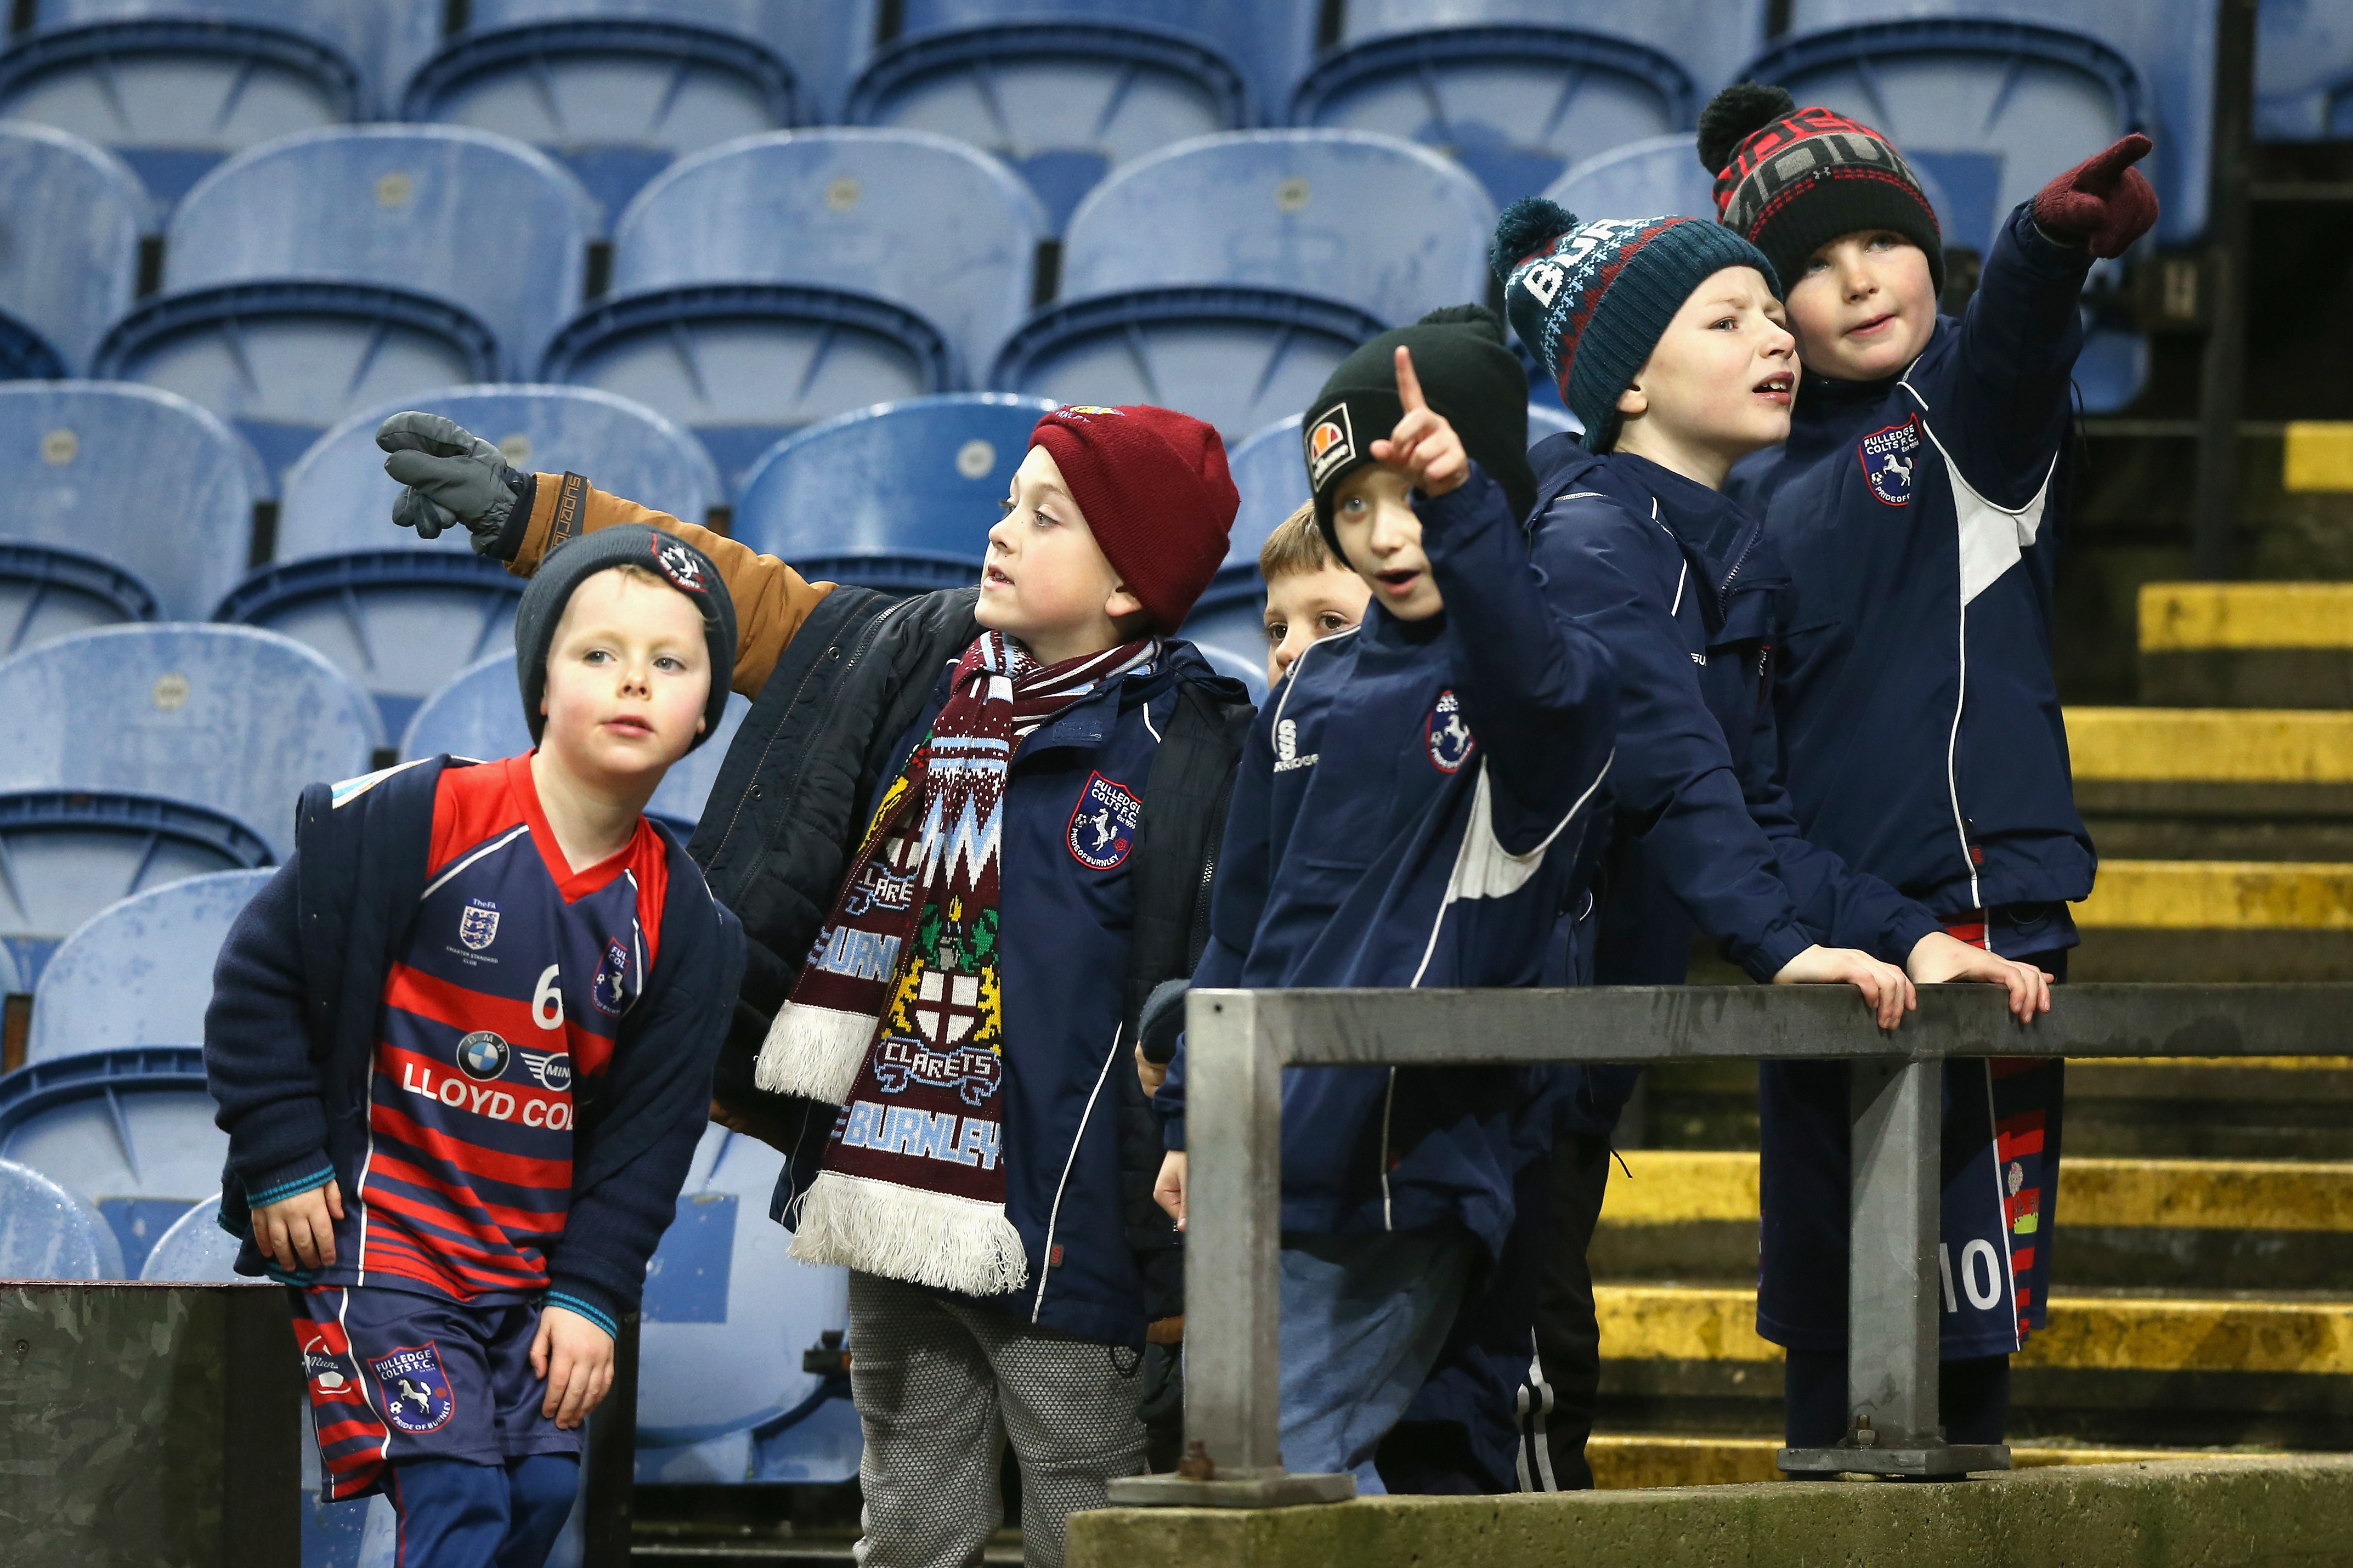 BURNLEY, ENGLAND - DECEMBER 23:  Young Burnley fans await kick off prior to the Premier League match between Burnley and Tottenham Hotspur at Turf Moor on December 23, 2017 in Burnley, England.  (Photo by Nigel Roddis/Getty Images)